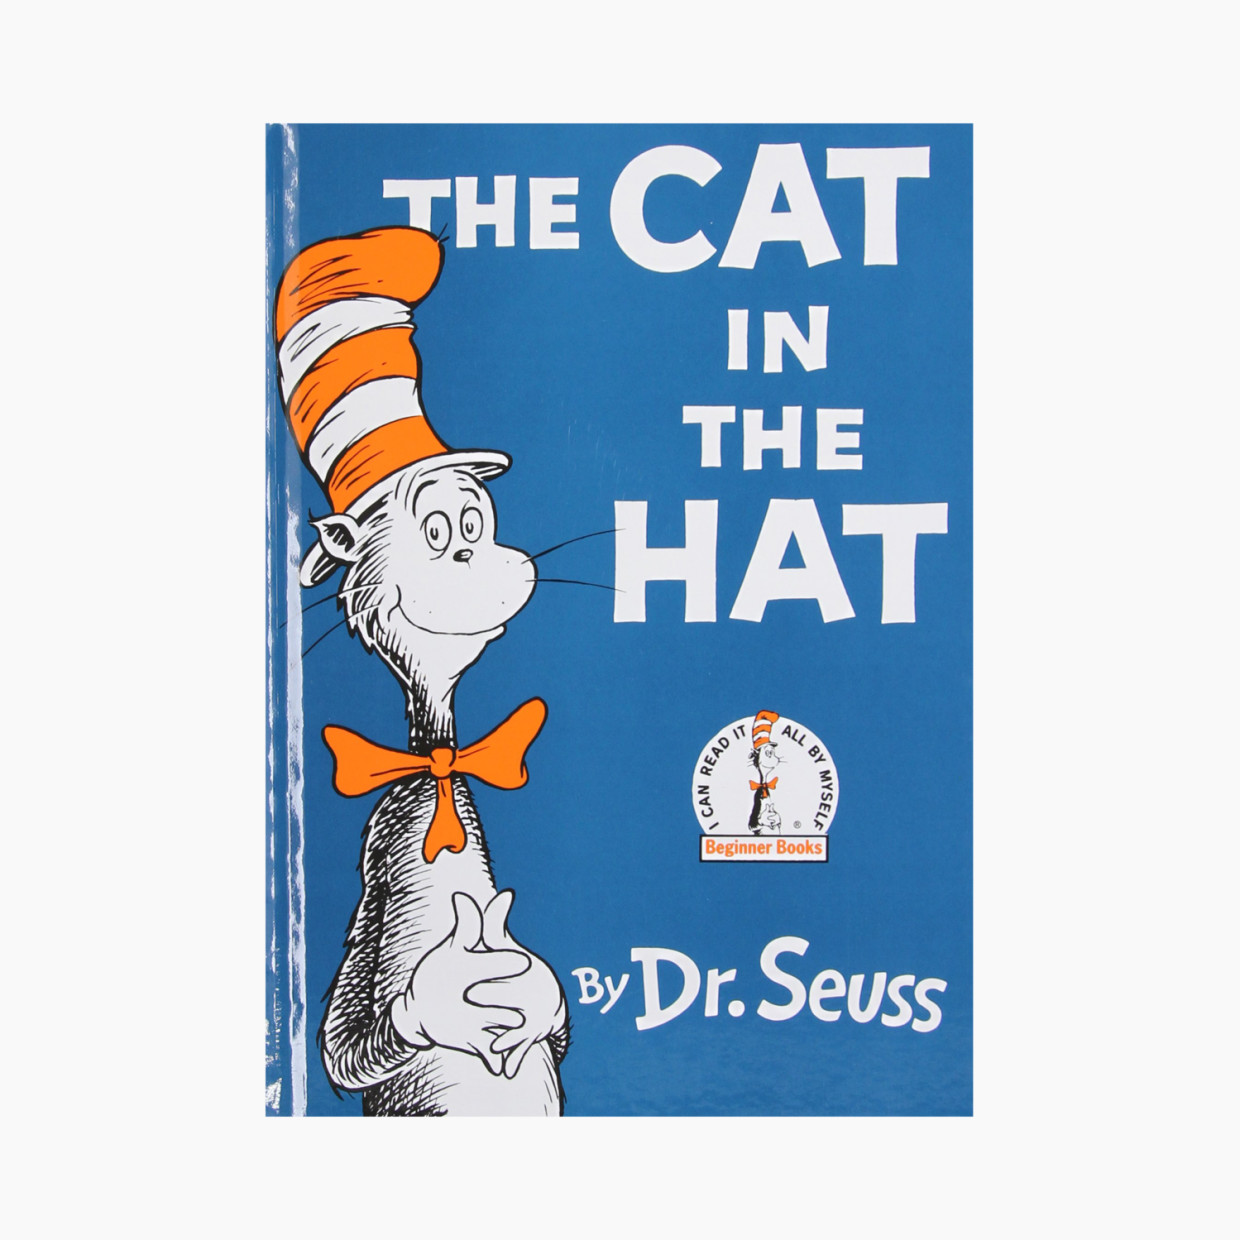 The Cat in the Hat.